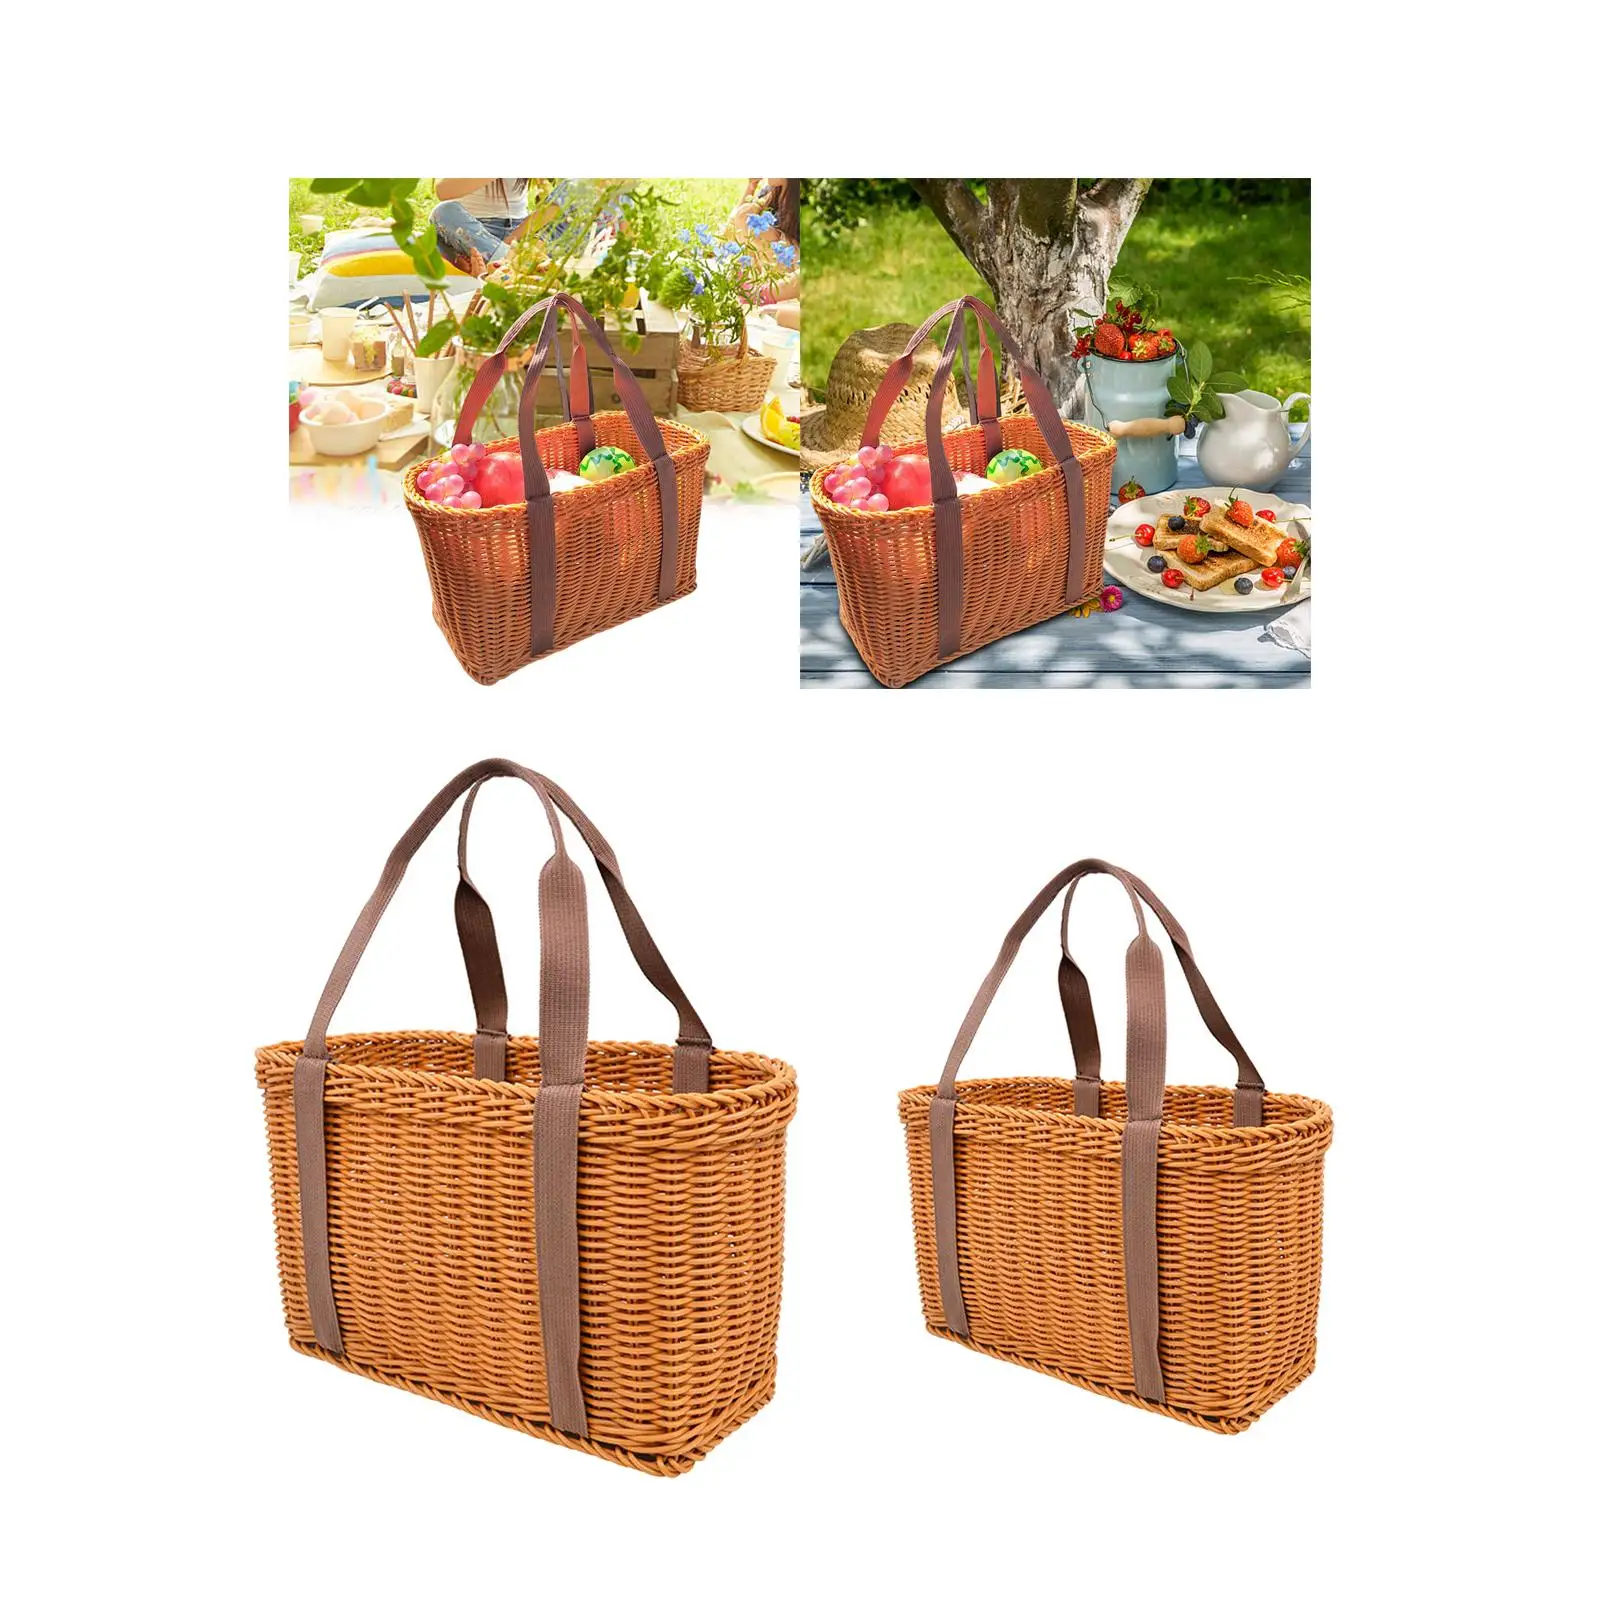 Woven Shopping Storage Basket Container Portable with Handle Multipurpose Market Basket Bag Picnic Basket for Outdoor Kitchen